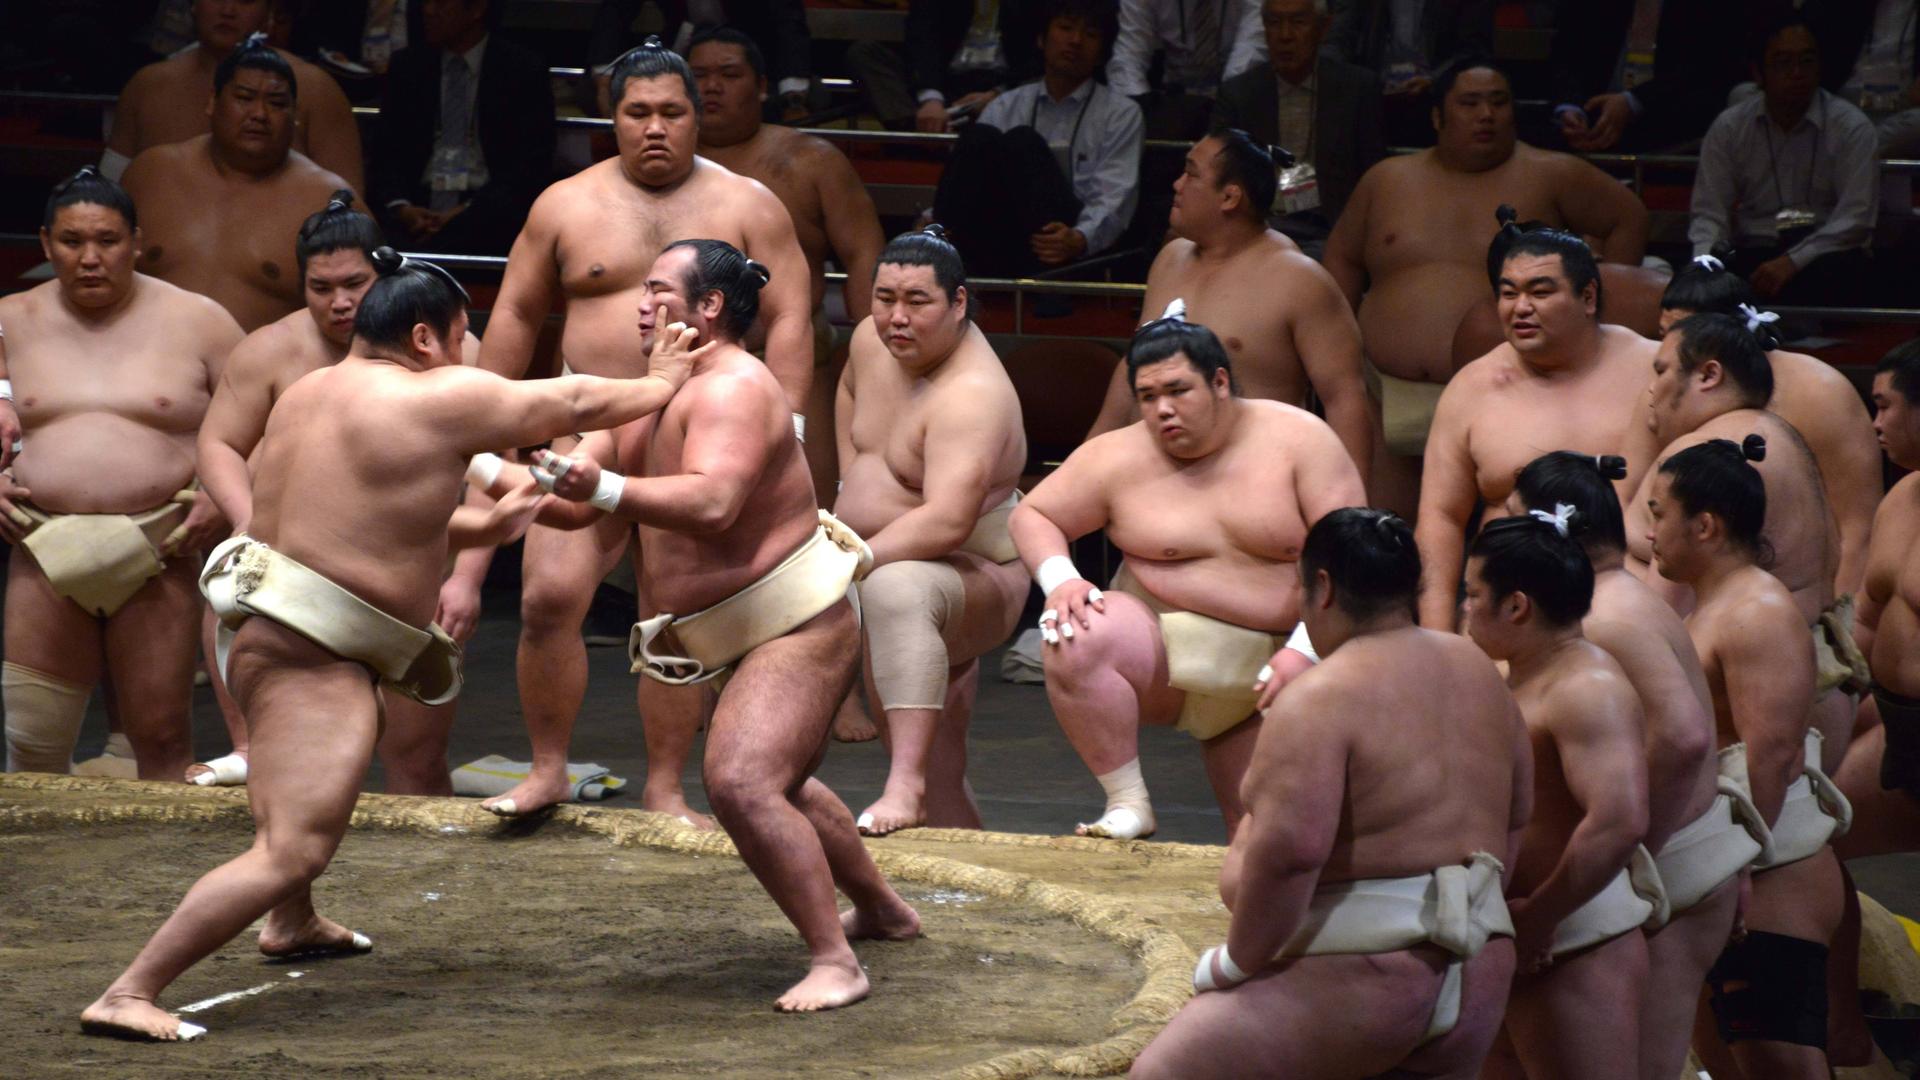 April 29, 2015 - Tokyo, JAPAN - Sumo wrestlers training in Tokyo, April 29, 2015. Sumo is Japan s national and is one of the most popular spectator sports in Japan. Sumo Wrestlers Training In Tokyo PUBLICATIONxINxGERxSUIxAUTxONLY - ZUMAn230April 29 2015 Tokyo Japan Sumo Wrestlers Training in Tokyo April 29 2015 Sumo is Japan s National and is One of The Most popular spectator Sports in Japan Sumo Wrestlers Training in Tokyo PUBLICATIONxINxGERxSUIxAUTxONLY ZUMAn230